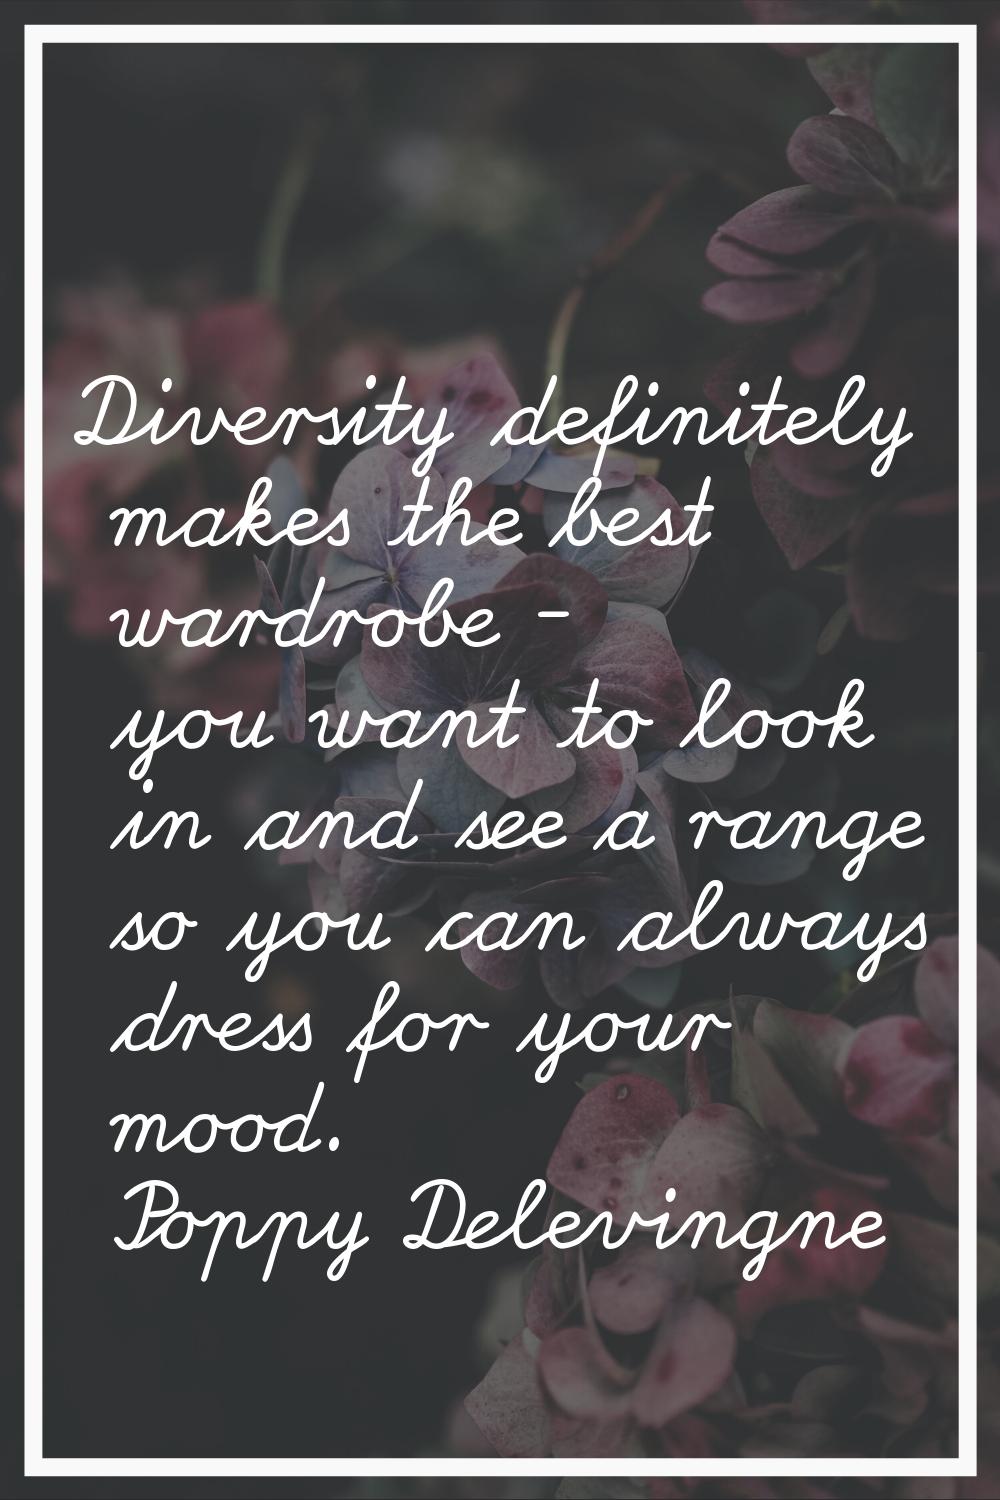 Diversity definitely makes the best wardrobe - you want to look in and see a range so you can alway